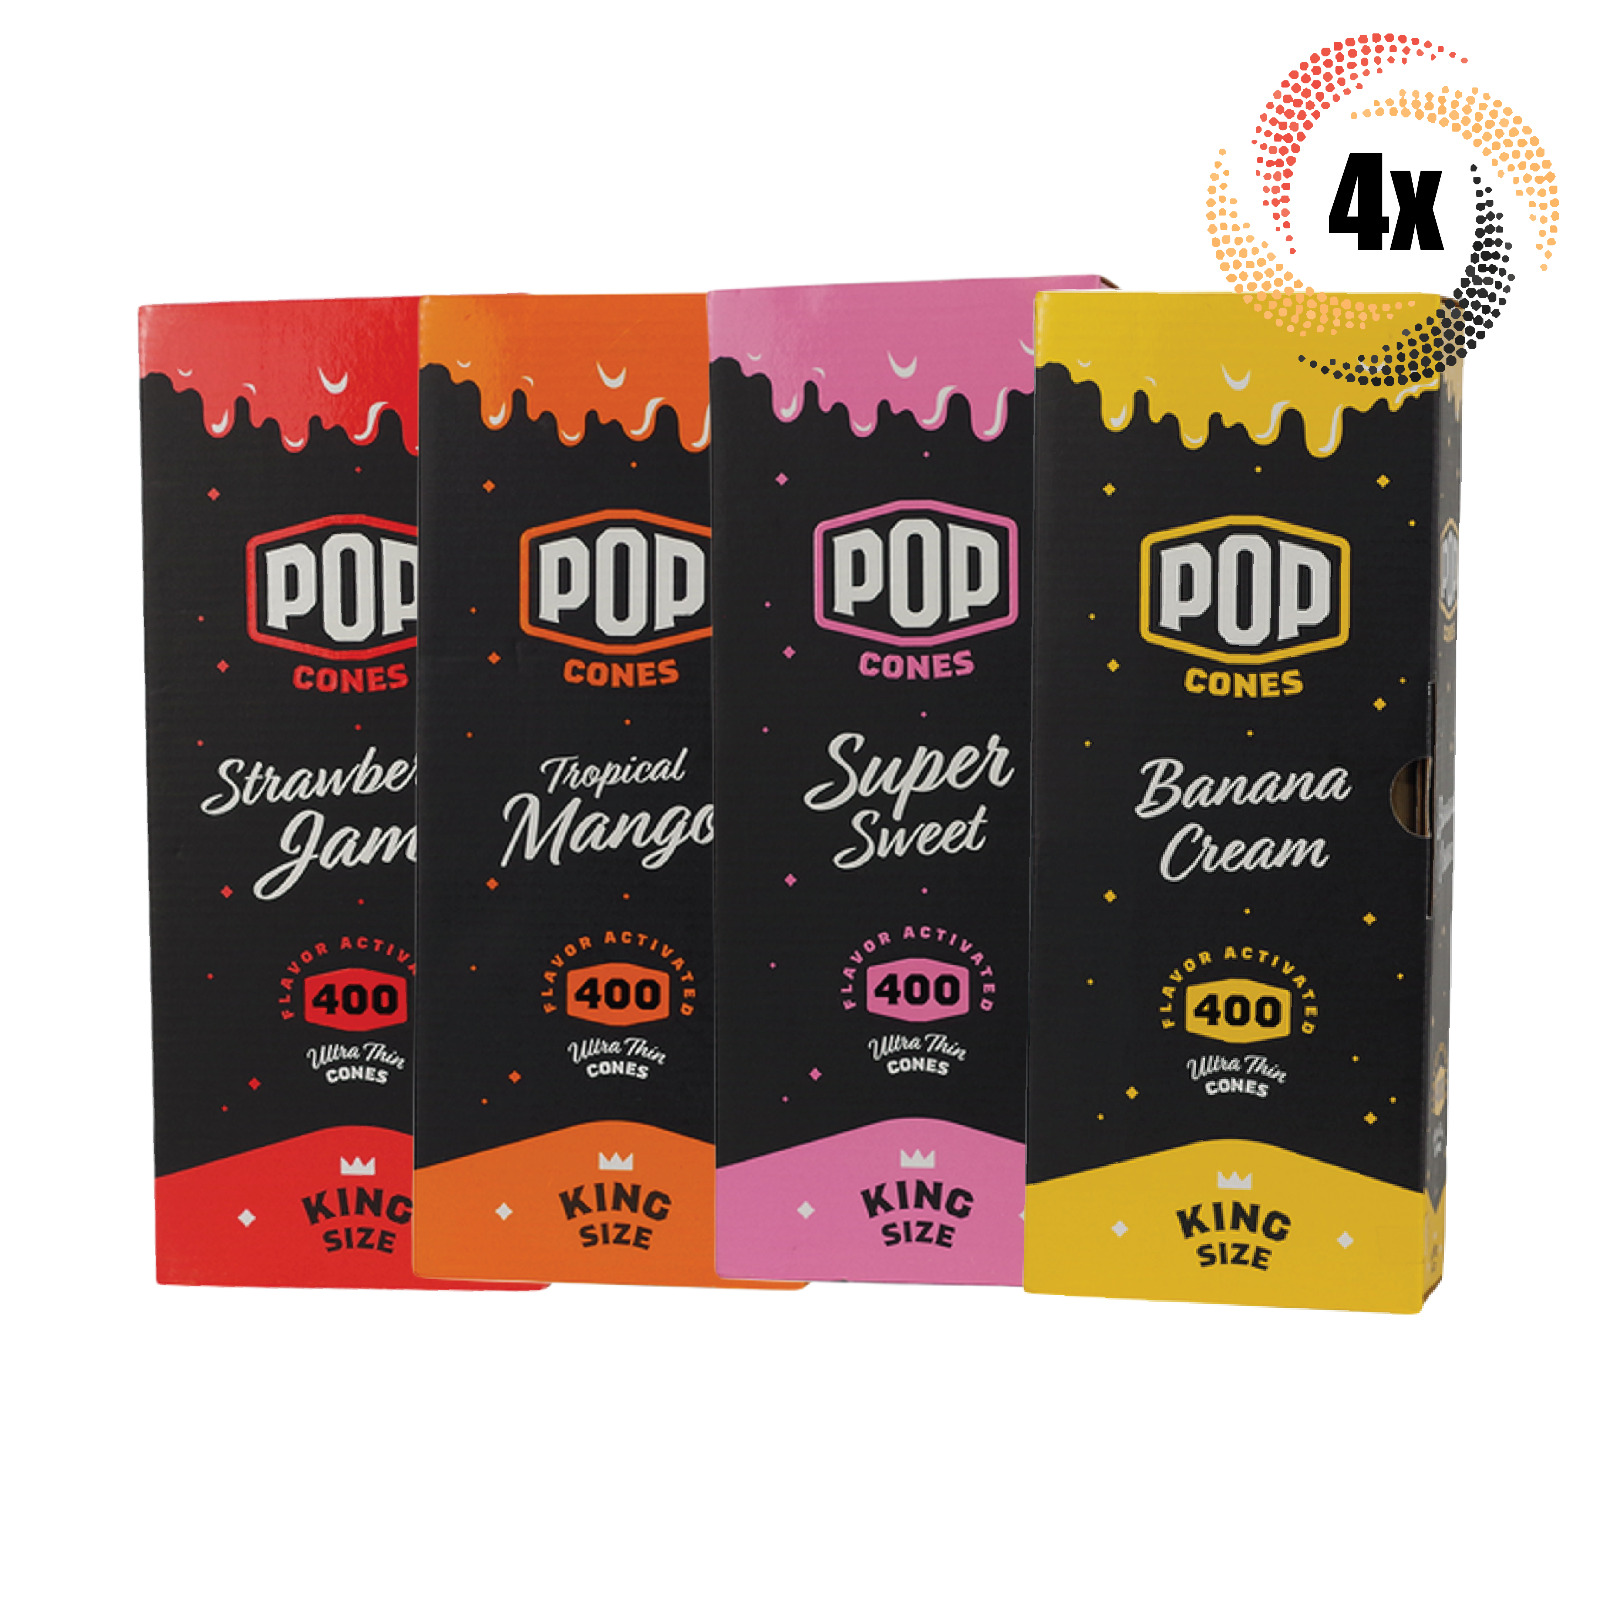 4x Boxes Pop Variety Cones | 400 Cones Each | King Size | Mix & Match Flavors